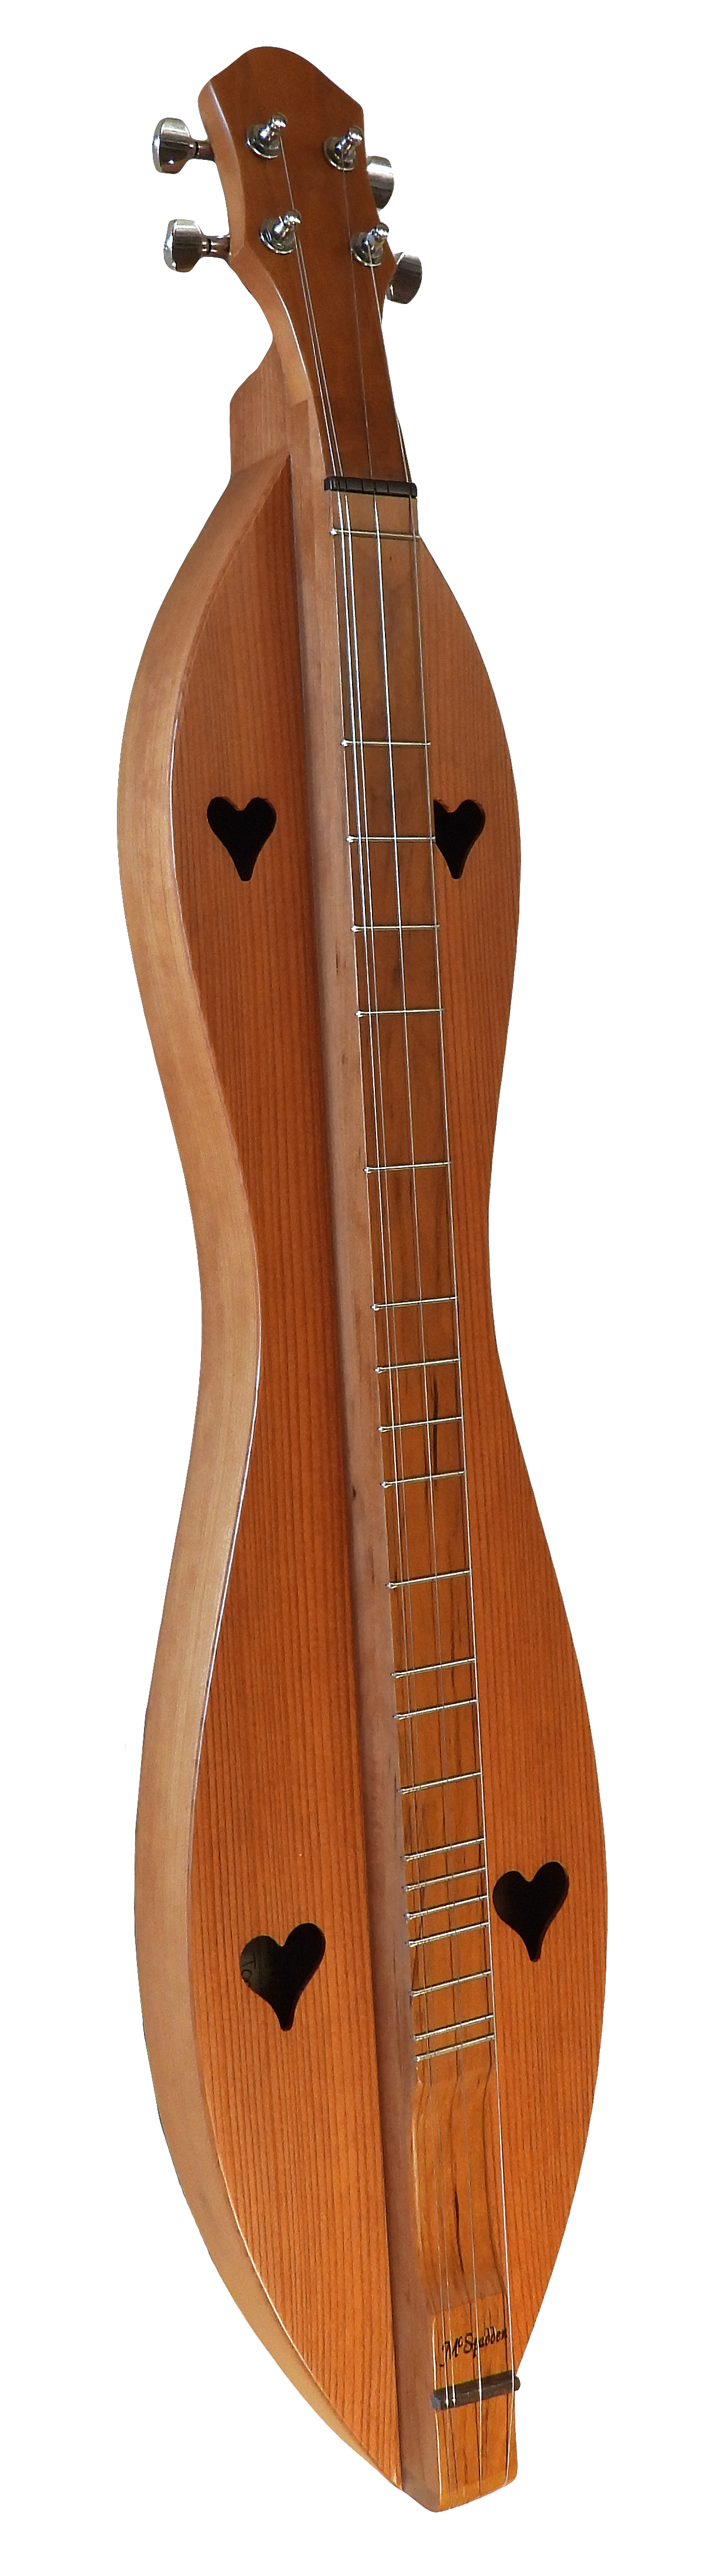 4 String, Flathead, Hourglass with Cherry back, sides and Redwood top (4FH26CR)